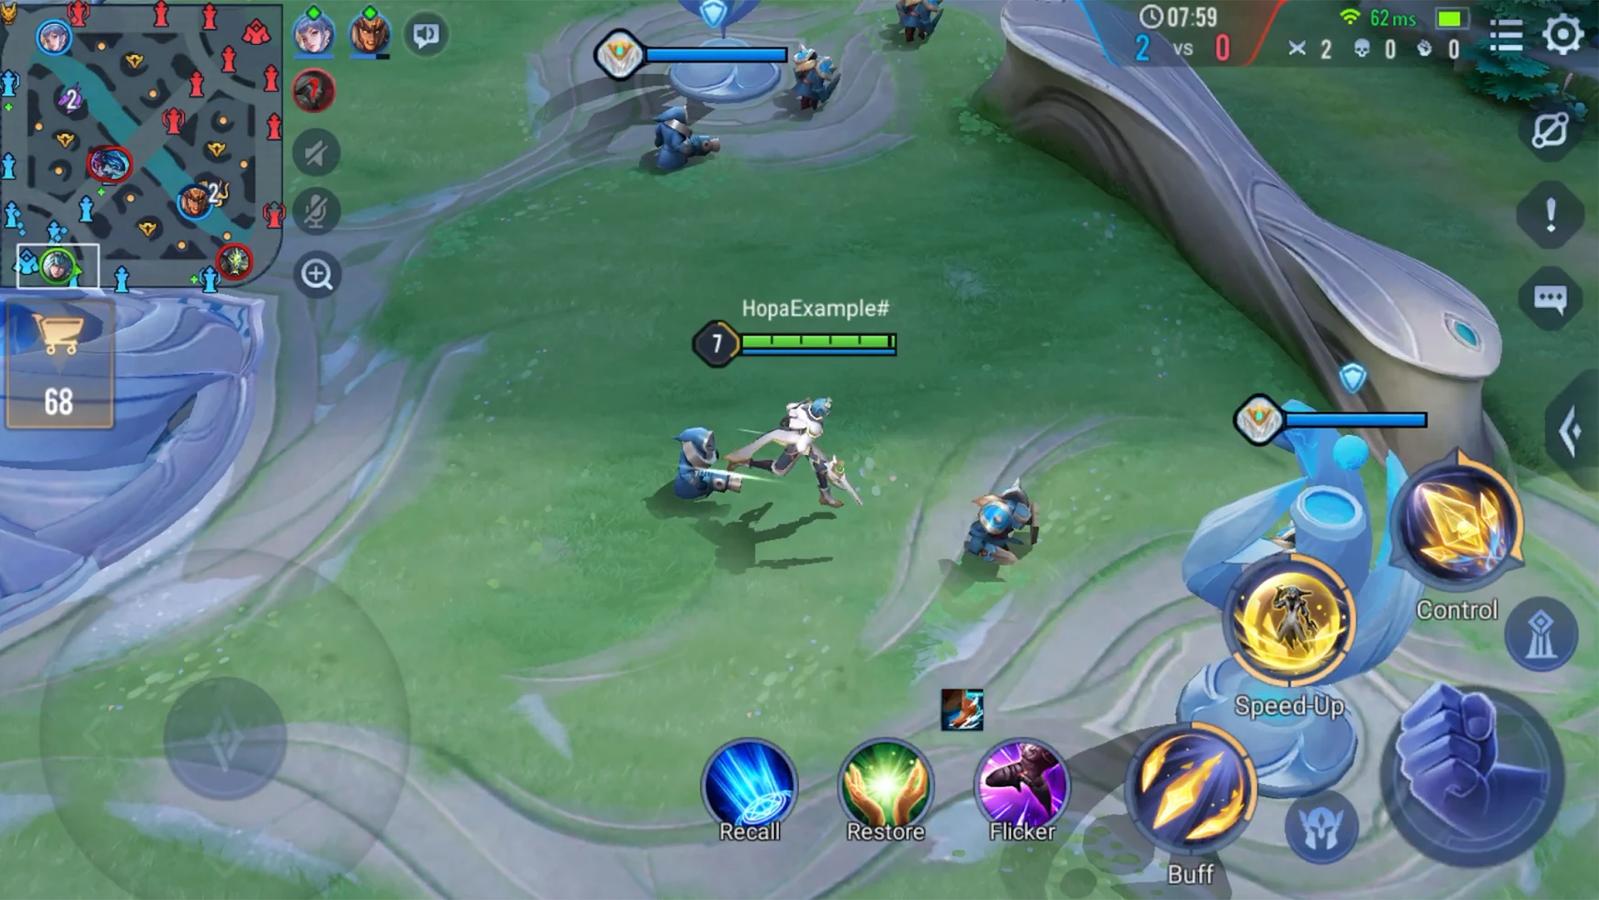 In-game screenshot of Arena of Valor featuring a visual inside the player's base.